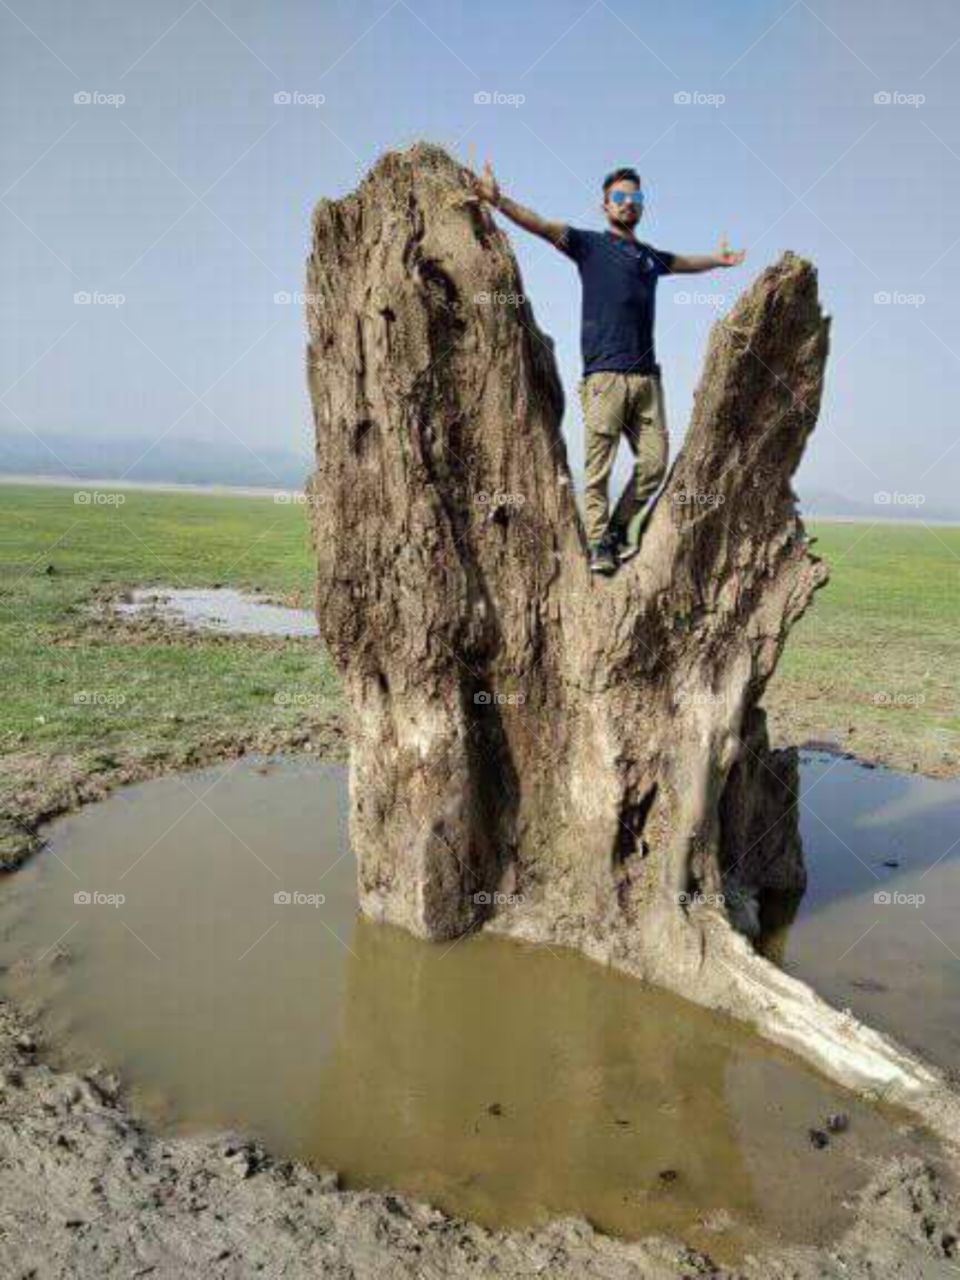 nature created this by itself is not handmade the water is all around the tree its look like the sign of victory